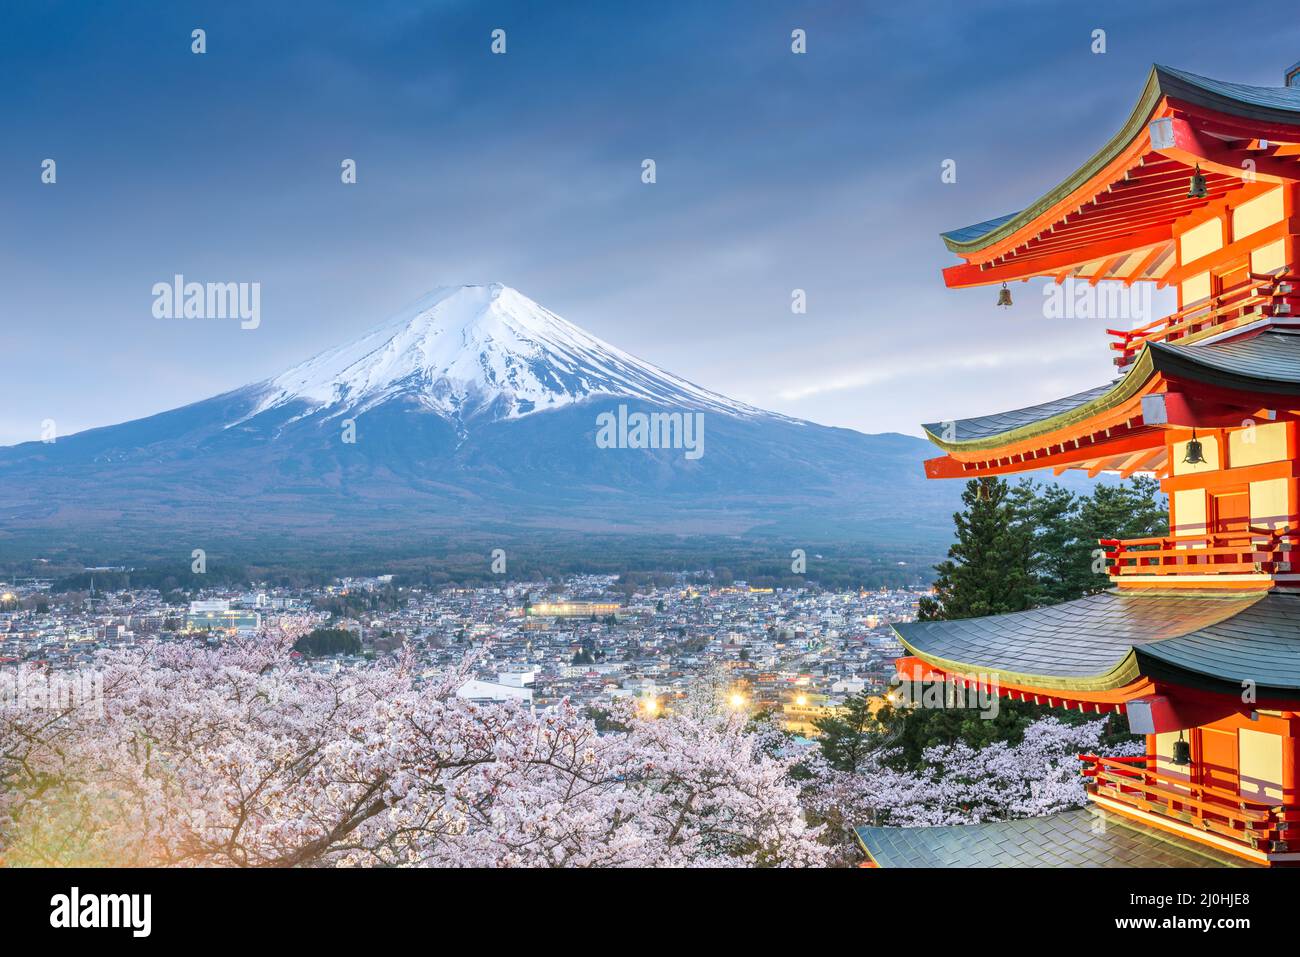 Mt. Fuji and pagoda as seen from Fujiyoshida, Japan during spring season with cherry blossoms. Stock Photo